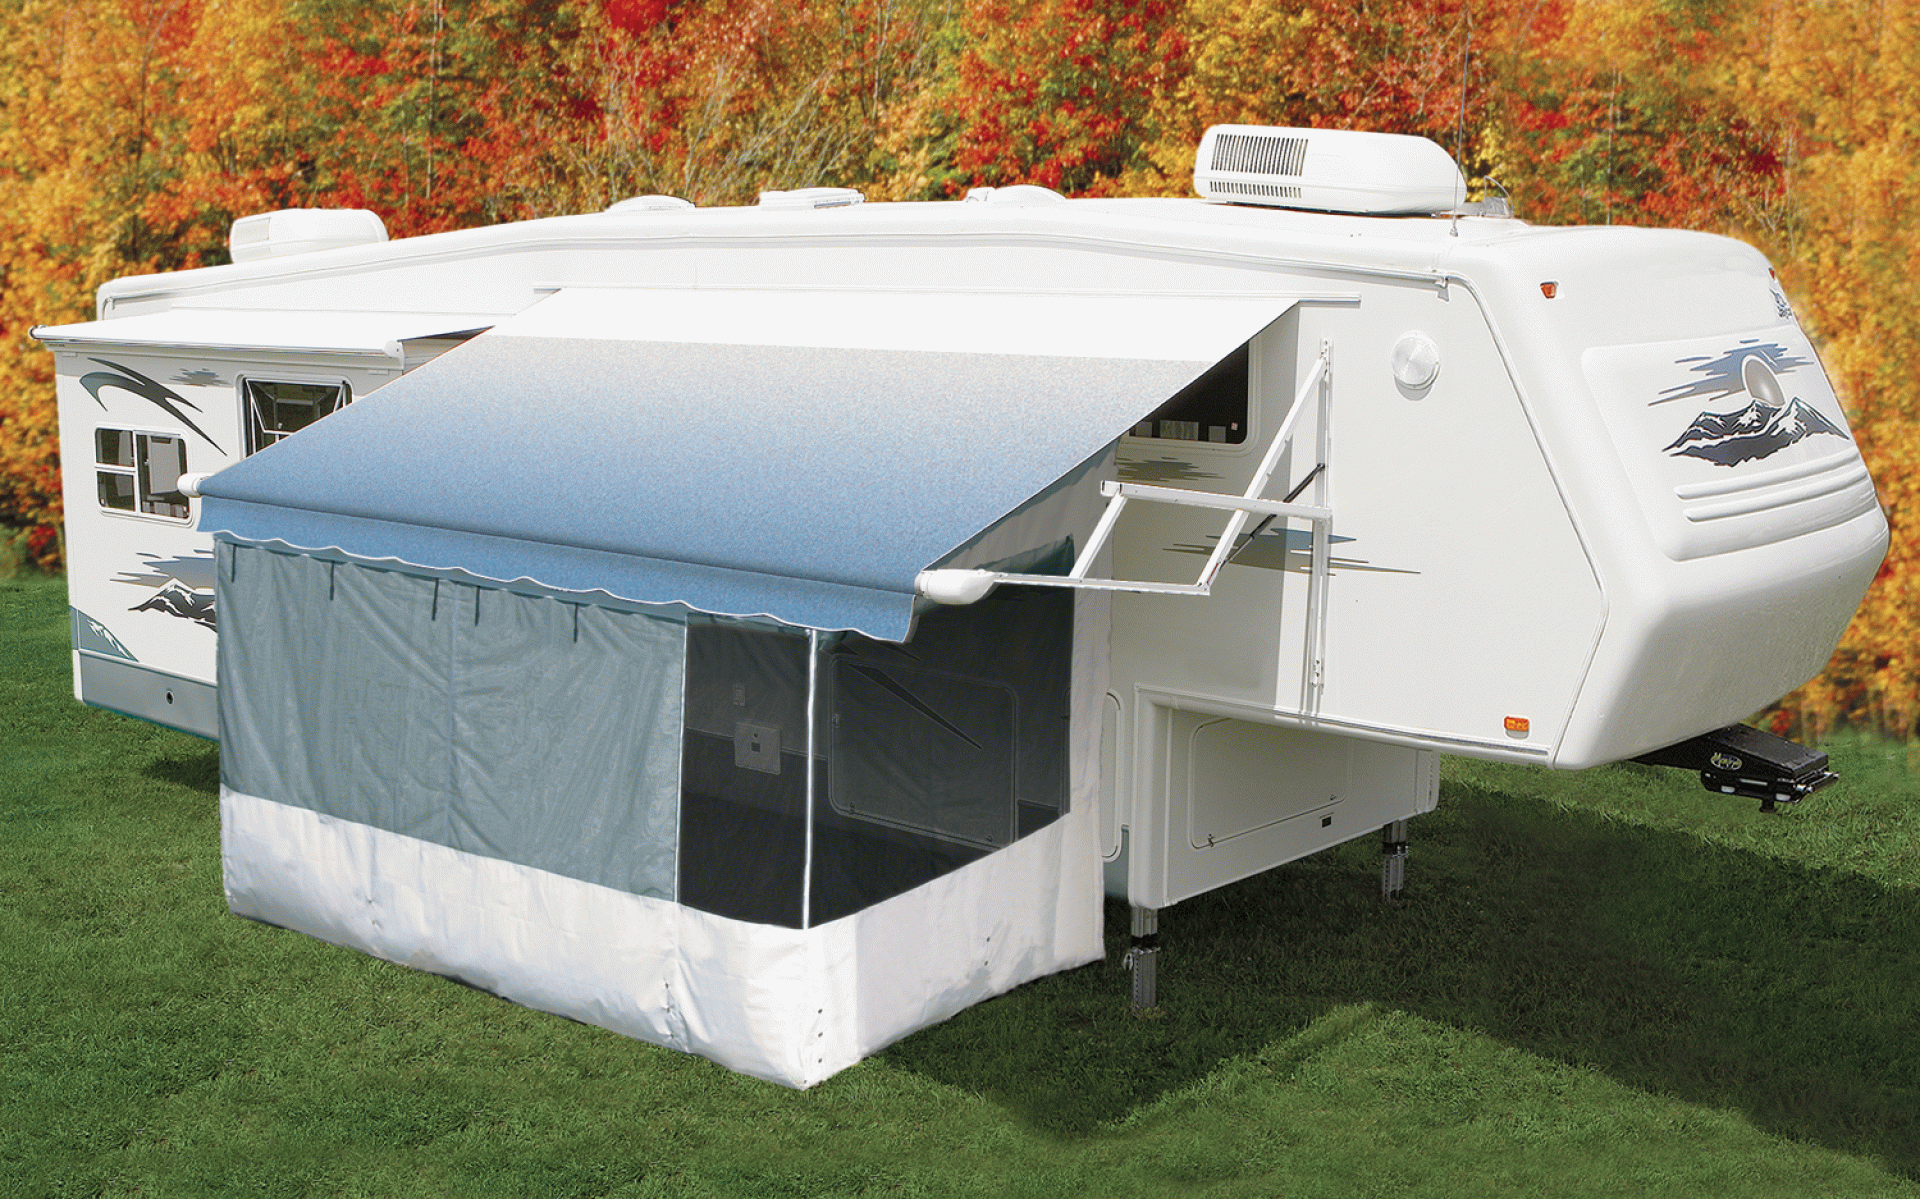 CAREFREE OF COLORADO | 711320WP | ADD-A-ROOM LTD COMPLETE 13' MANUAL AND 12V STEEP PITCH AWNING